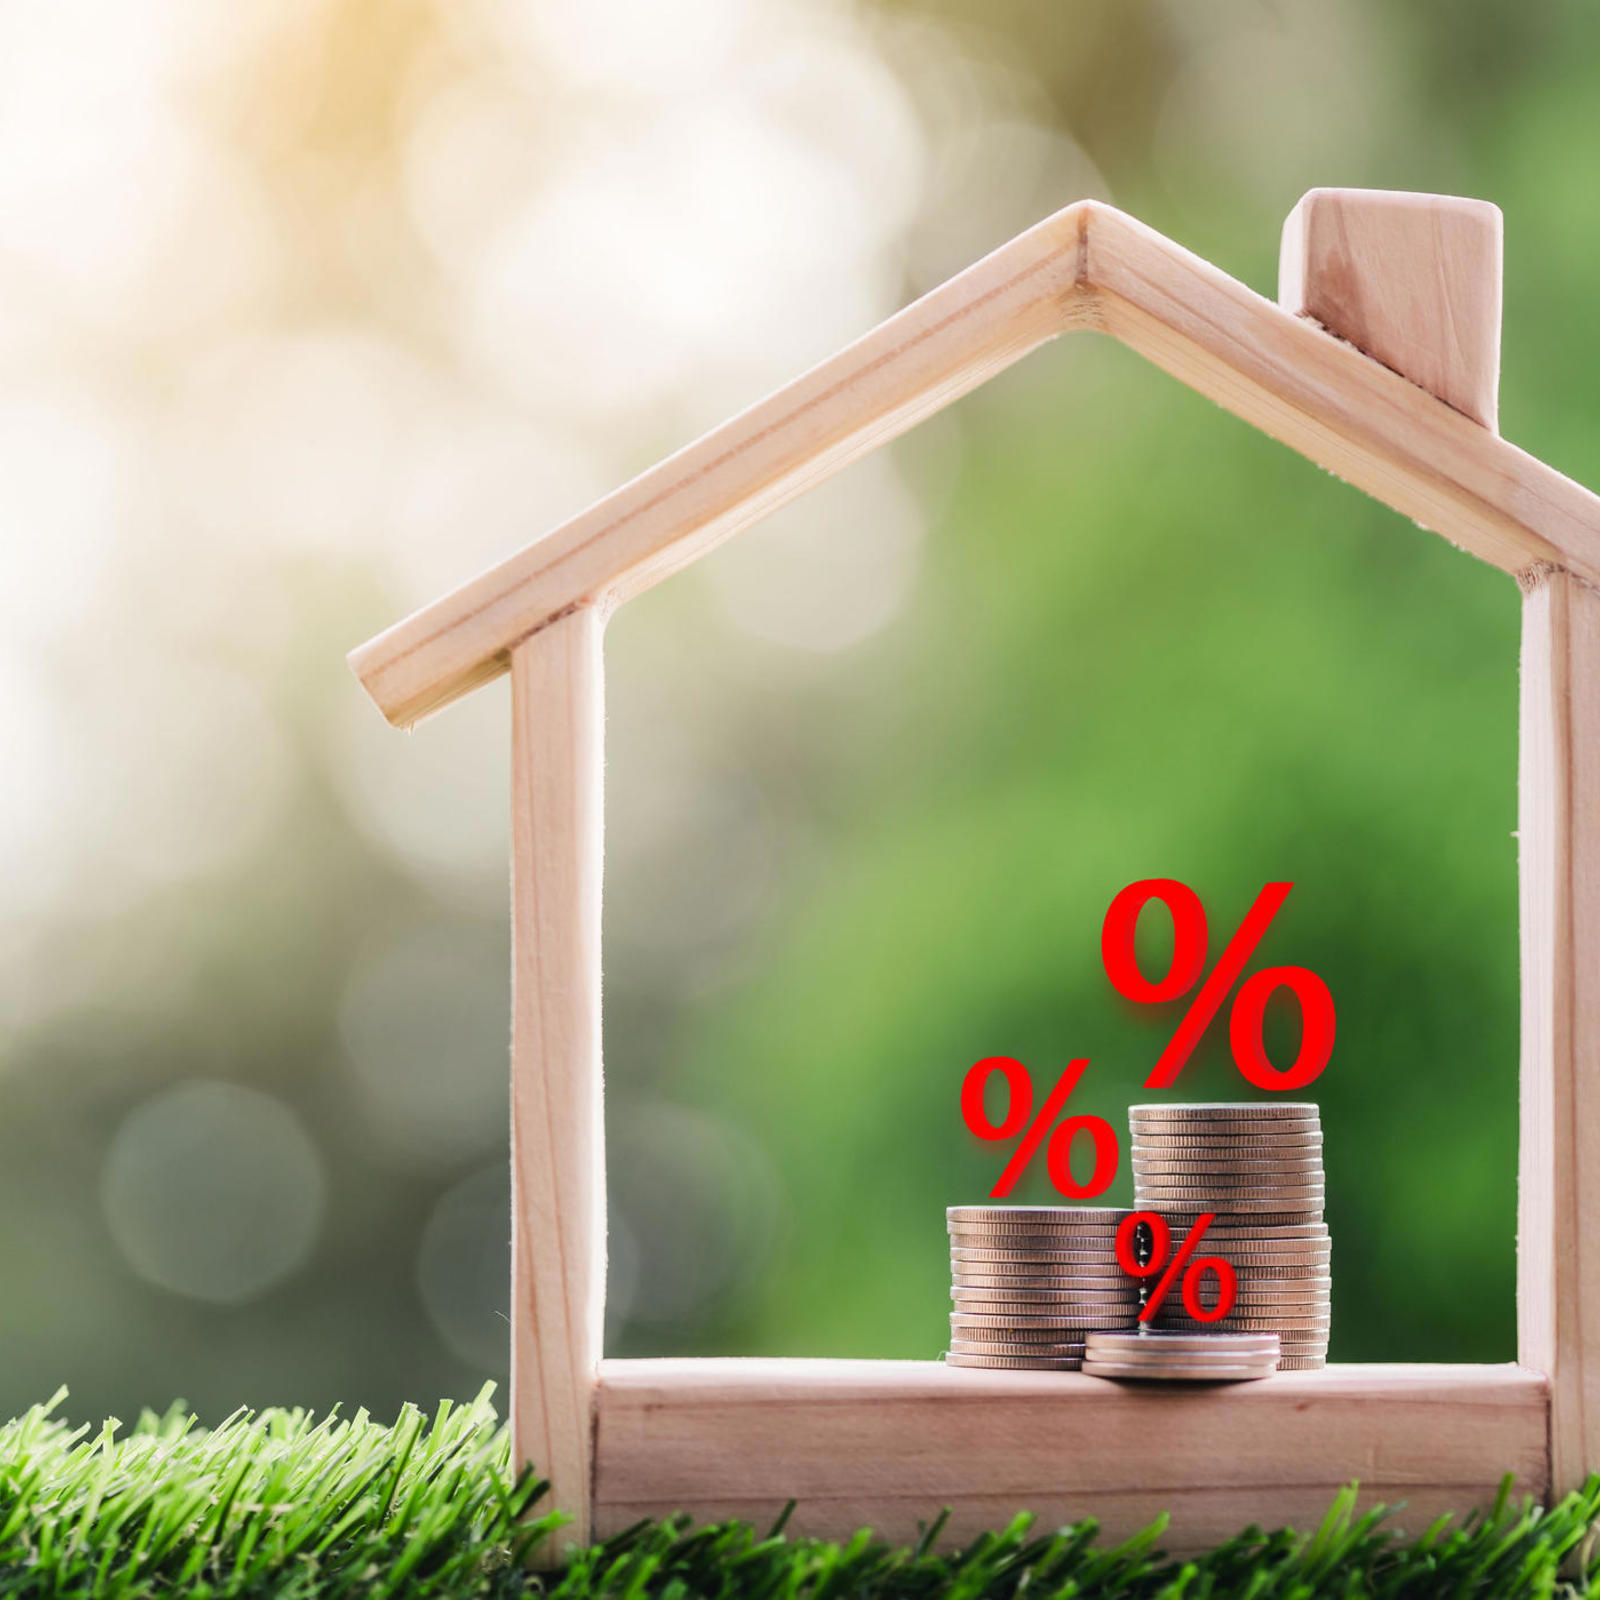 Mortgage interest rate forecast for 2024 Everything experts think will